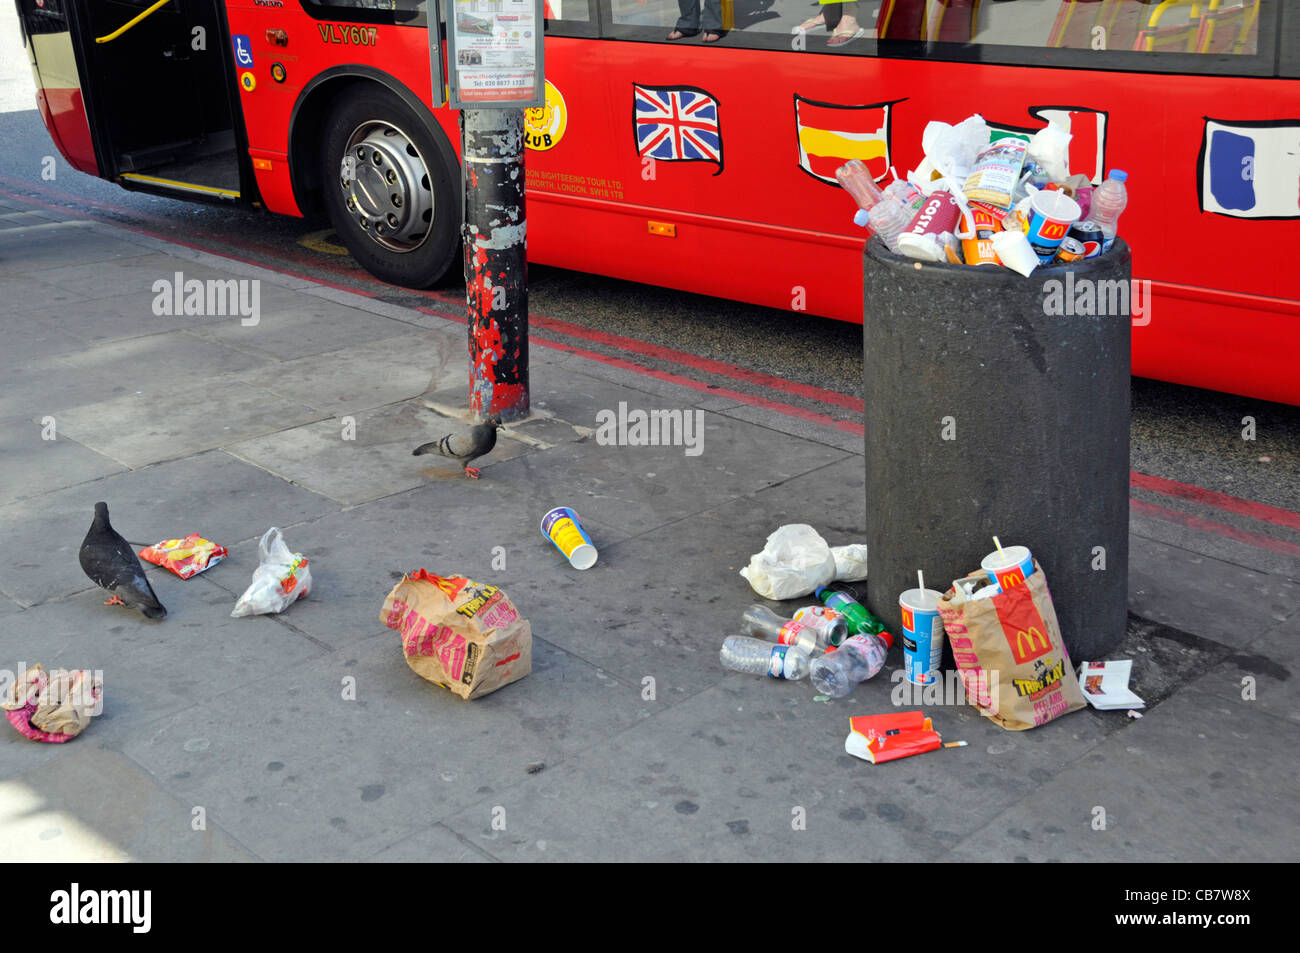 Waste management required to littering scene street refuse bin full of rubbish garbage litter & trash spilling on pavement beside London tour bus UK Stock Photo